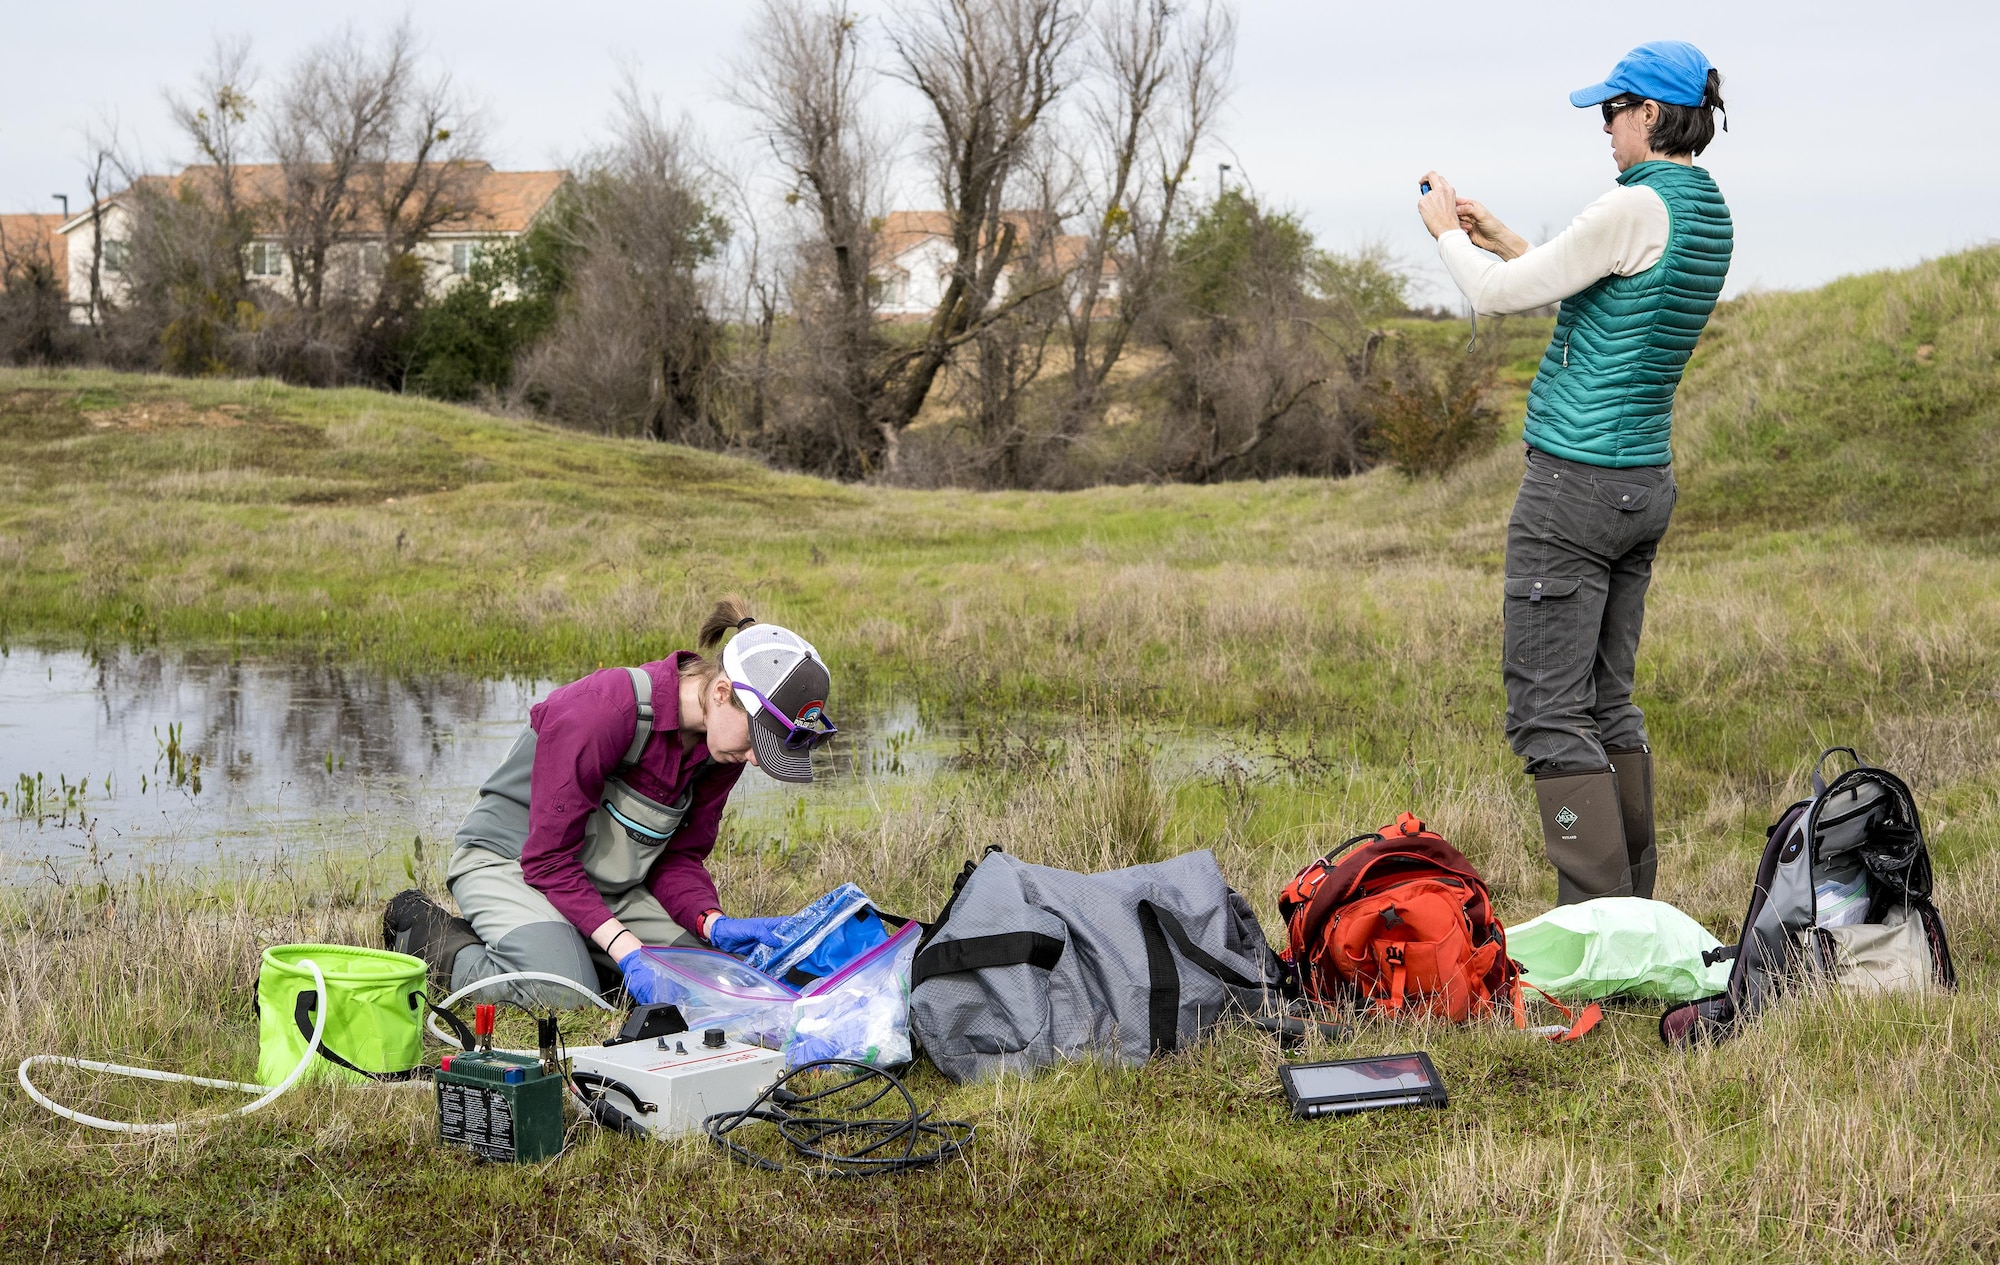 Dr. Alisa Wade (right), University of Montana, and Brett Addis (left), Ph.D candidate, gather data for a “habitat quality assessment” project to determine if Travis Air Force Base, Calif.,  has a viable environment for the western spadefoot toad during a survey at the base Feb. 13, 2017. The assessment includes recording data for vegetation type, soil friability and a visual check for mammal burrows and WST predators. Wade and Addis will also collect DNA samples from several ephemeral vernal pools through a filter that will go back to a genetics lab to determine if any DNA from the WST is floating around the pool, indicating the toads have been there. (U.S. Air Force photo/ Heide Couch)